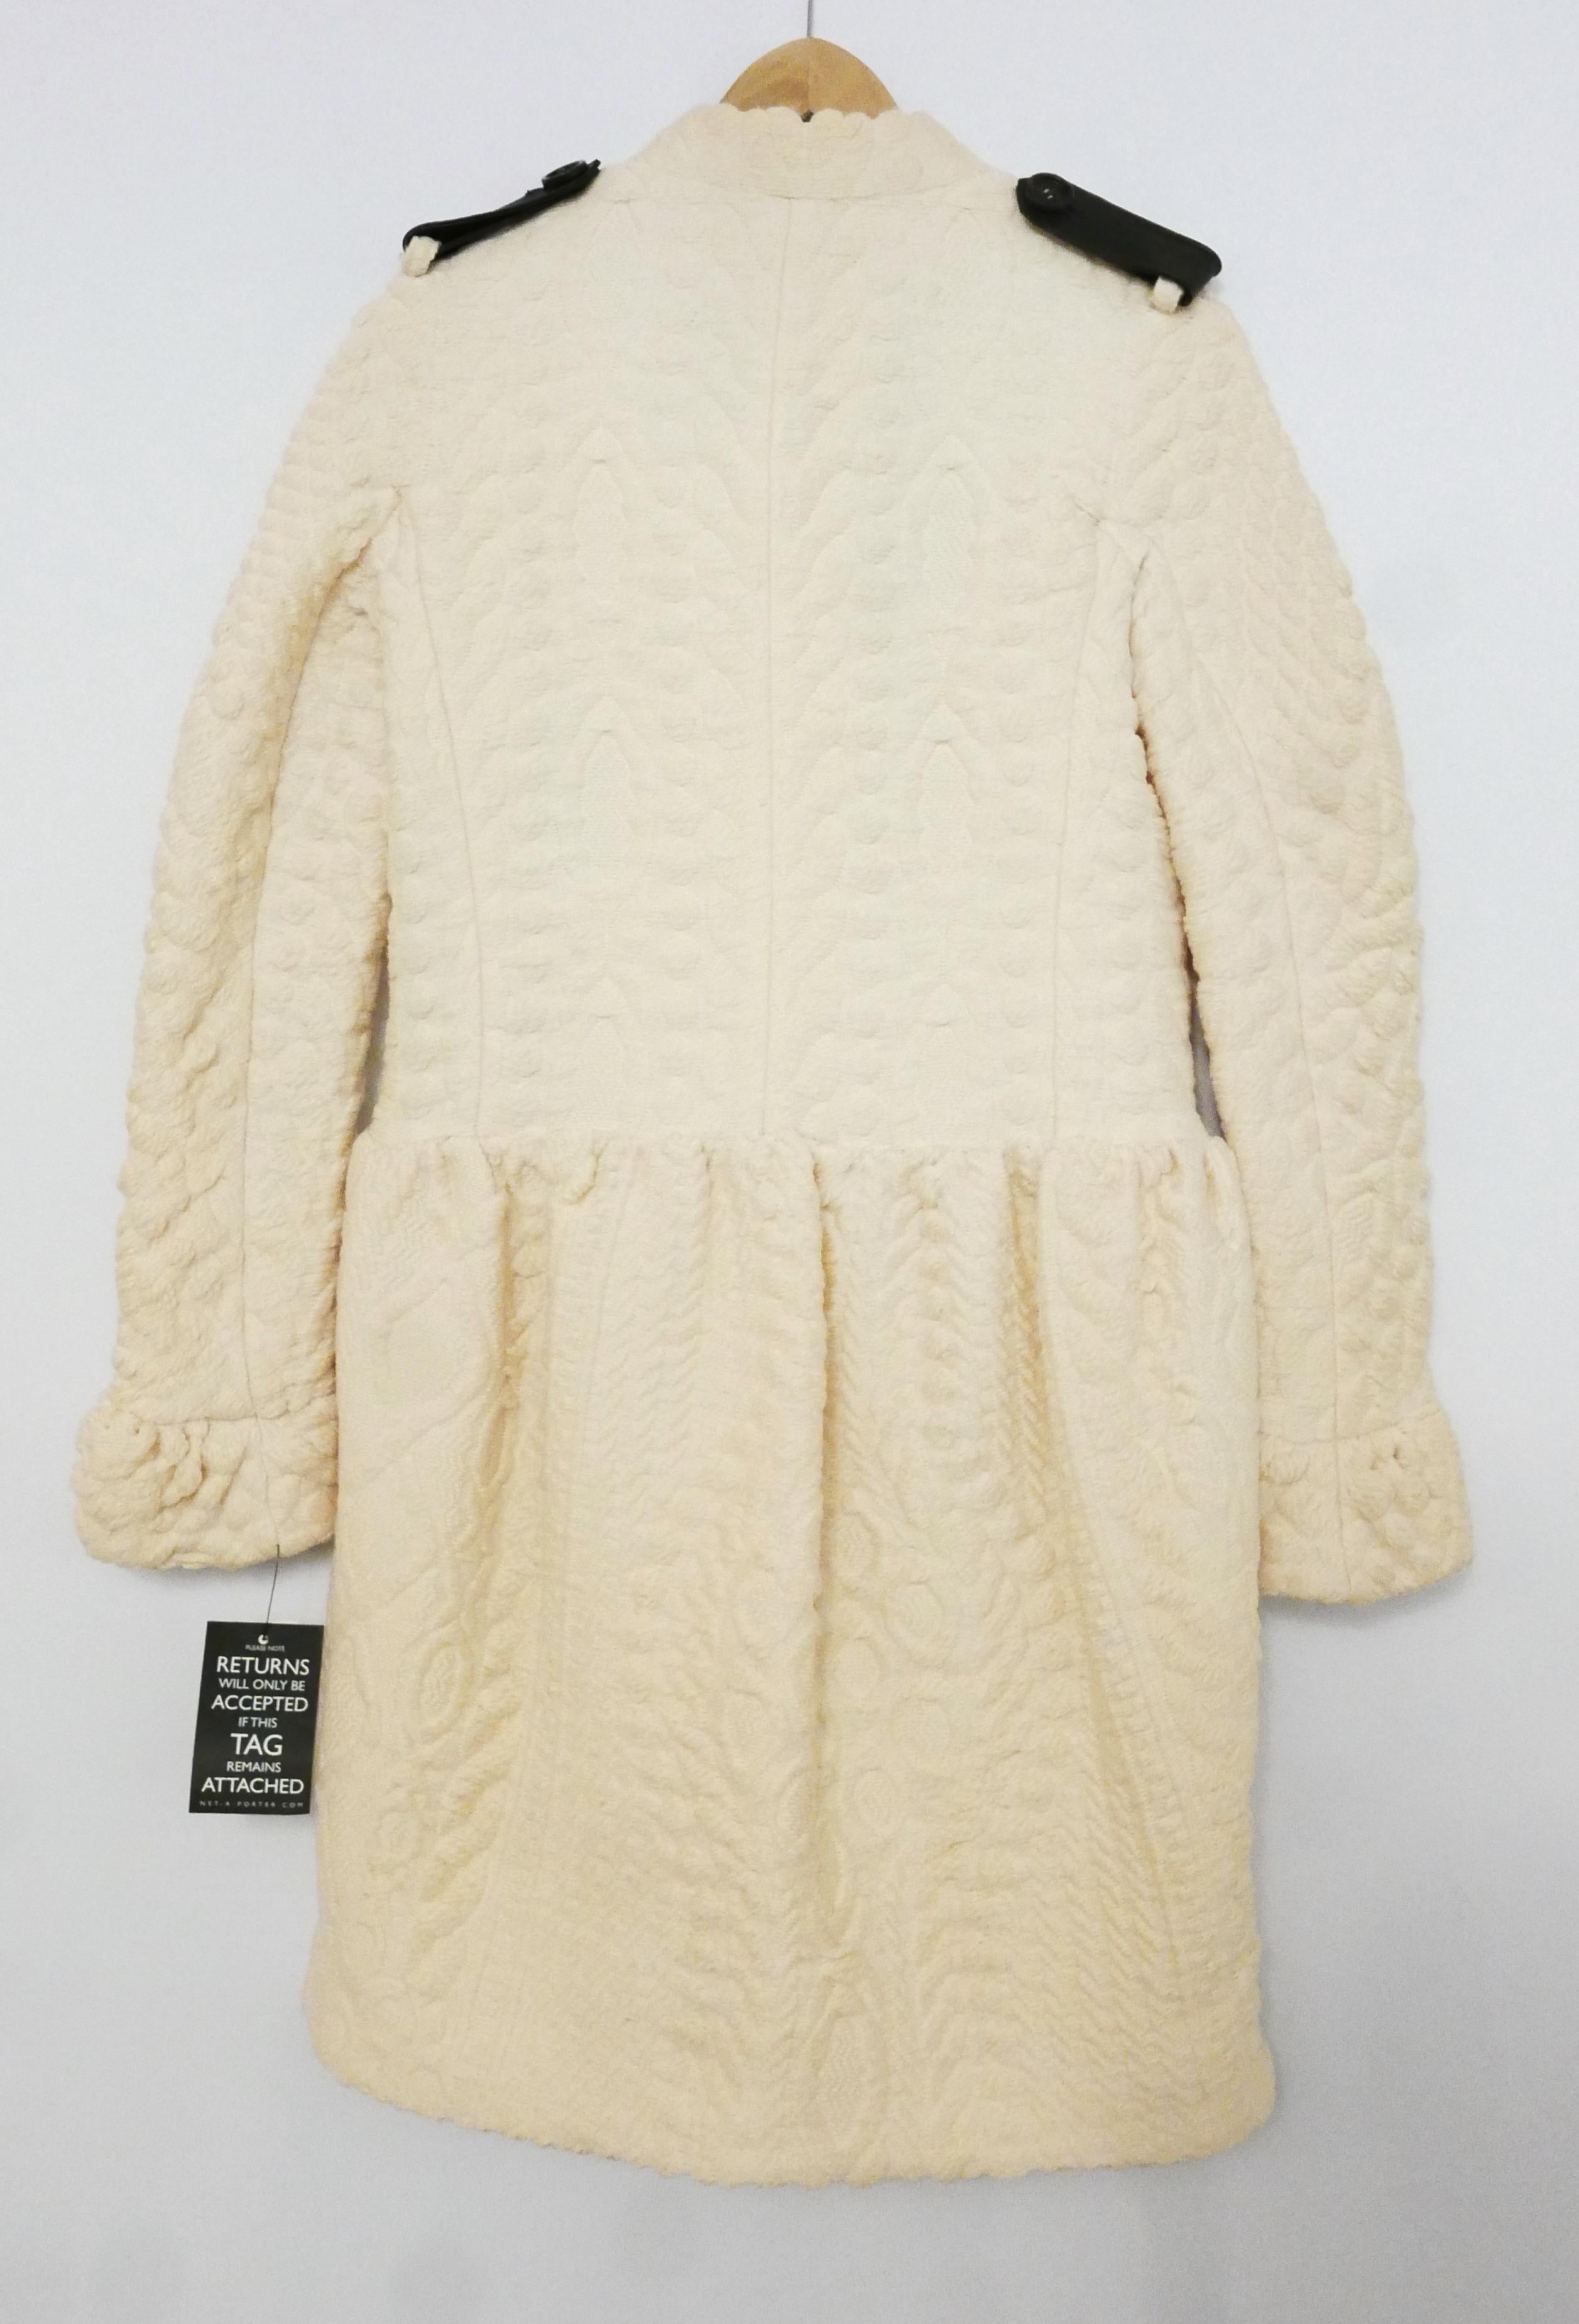 Burberry Prorsum AW11 Cable Knit Trench Coat In New Condition For Sale In London, GB